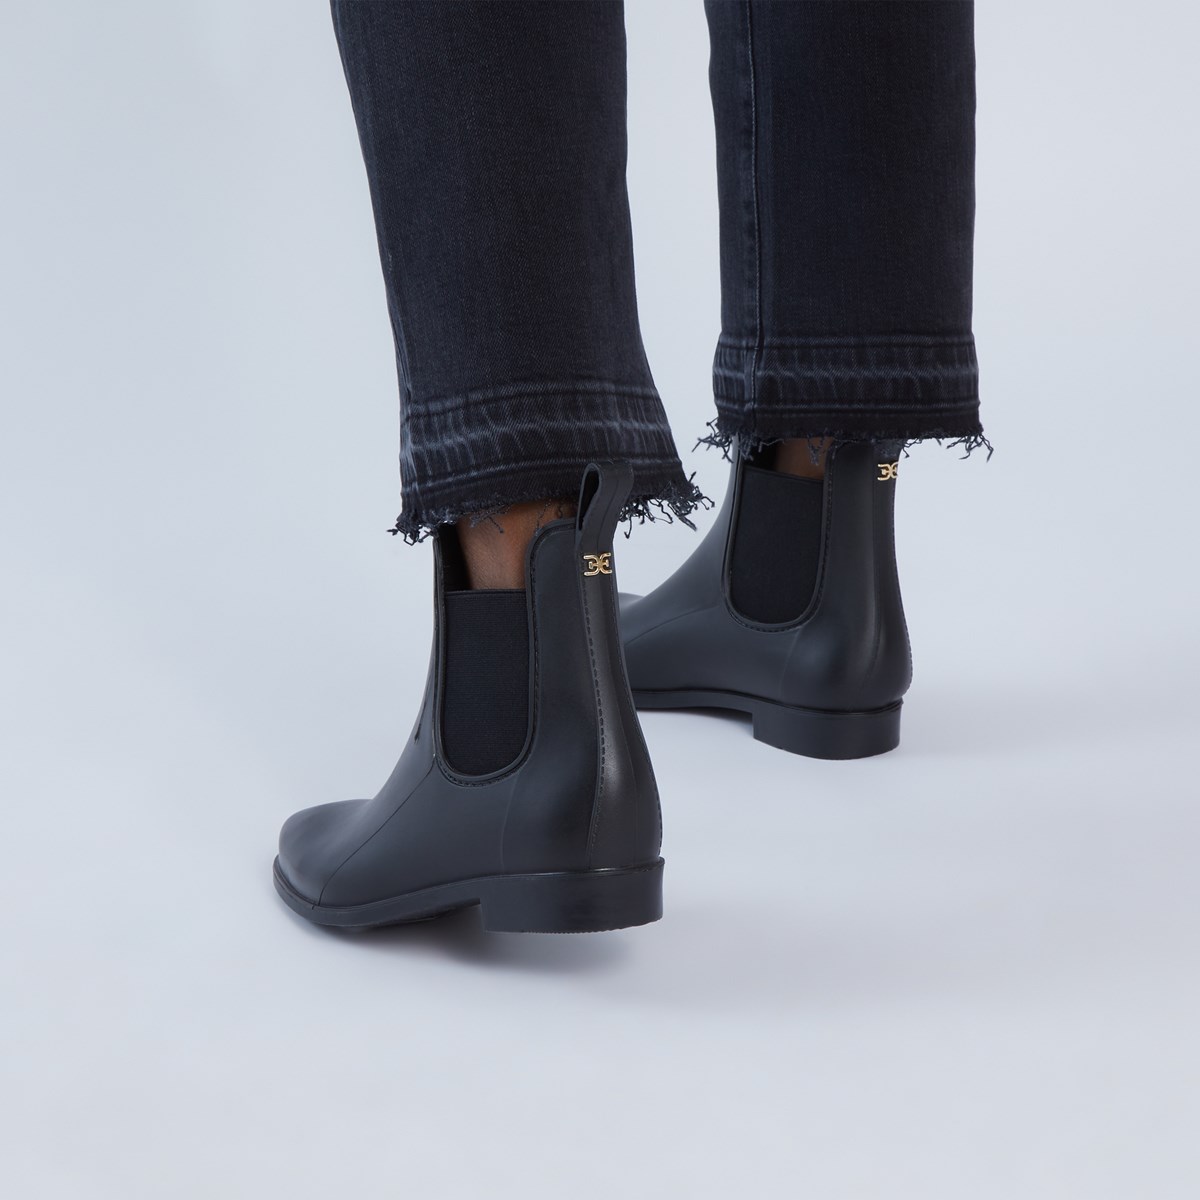 Women's Tinsley Boots in Matte Black 